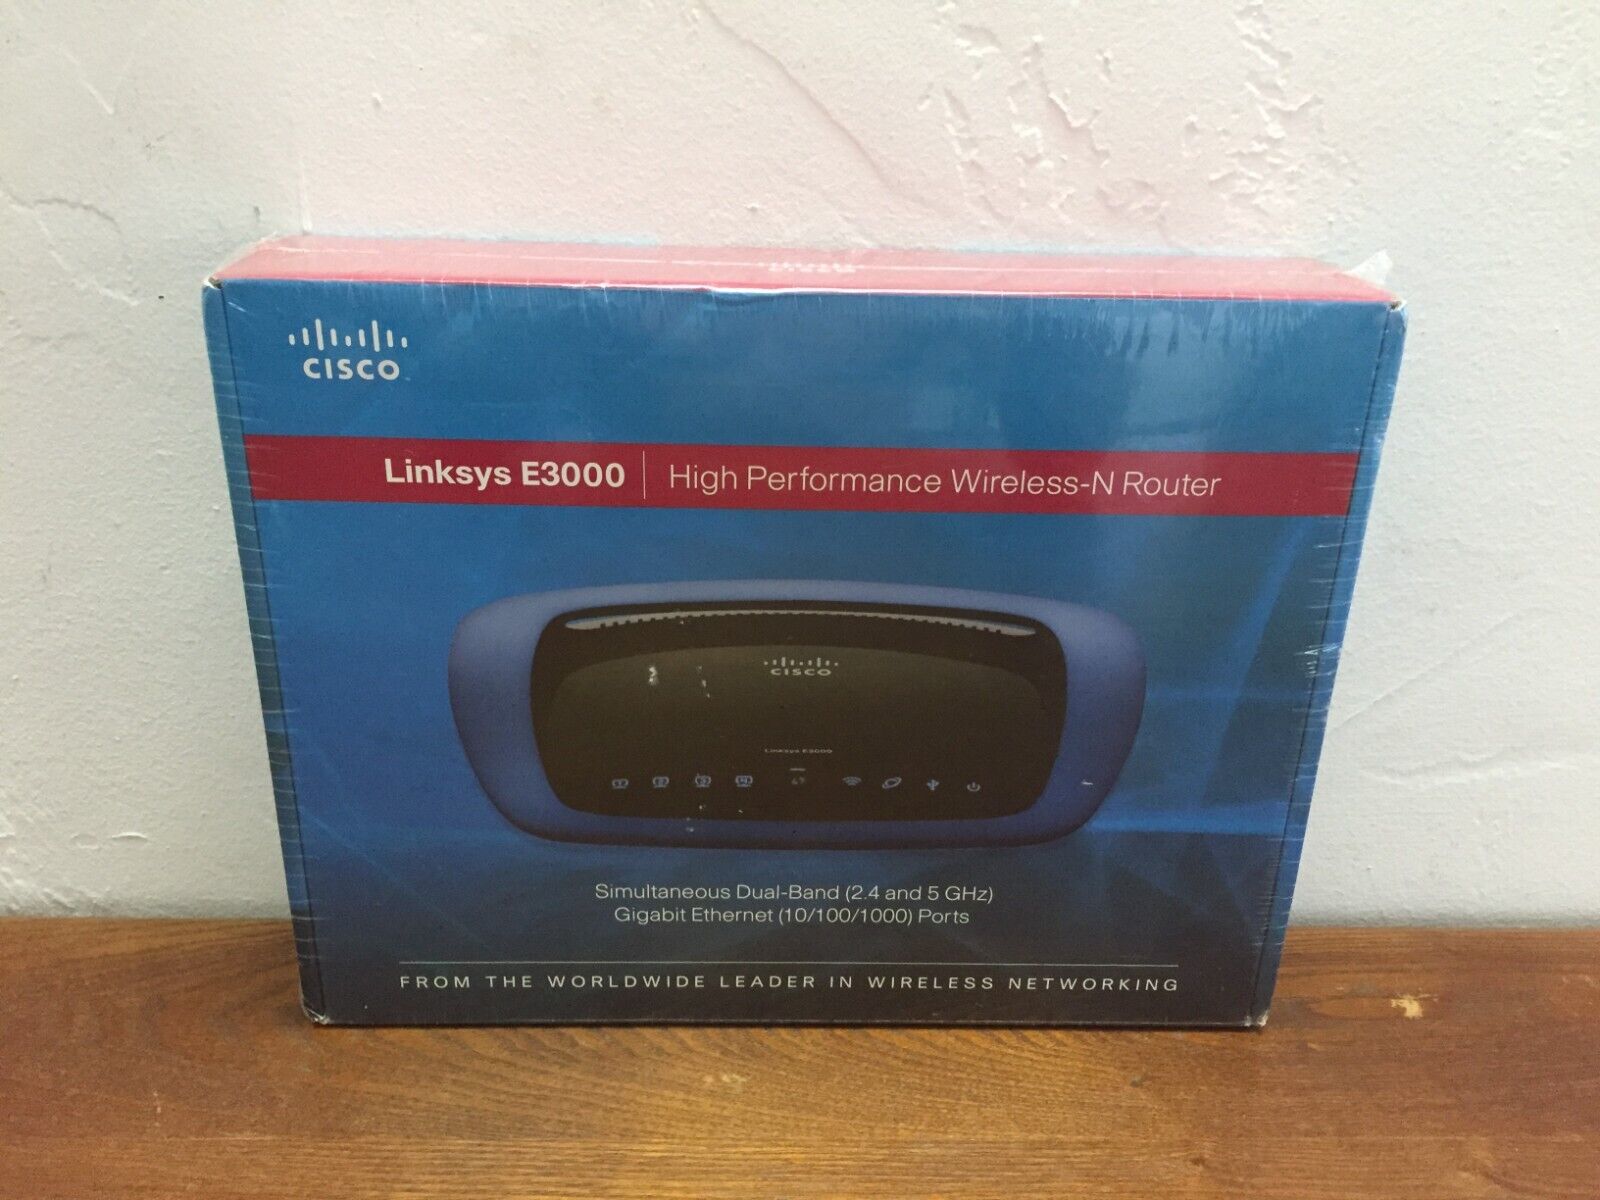 Cisco Linksys E3000 High Performance Wireless-N Router - New - Sealed